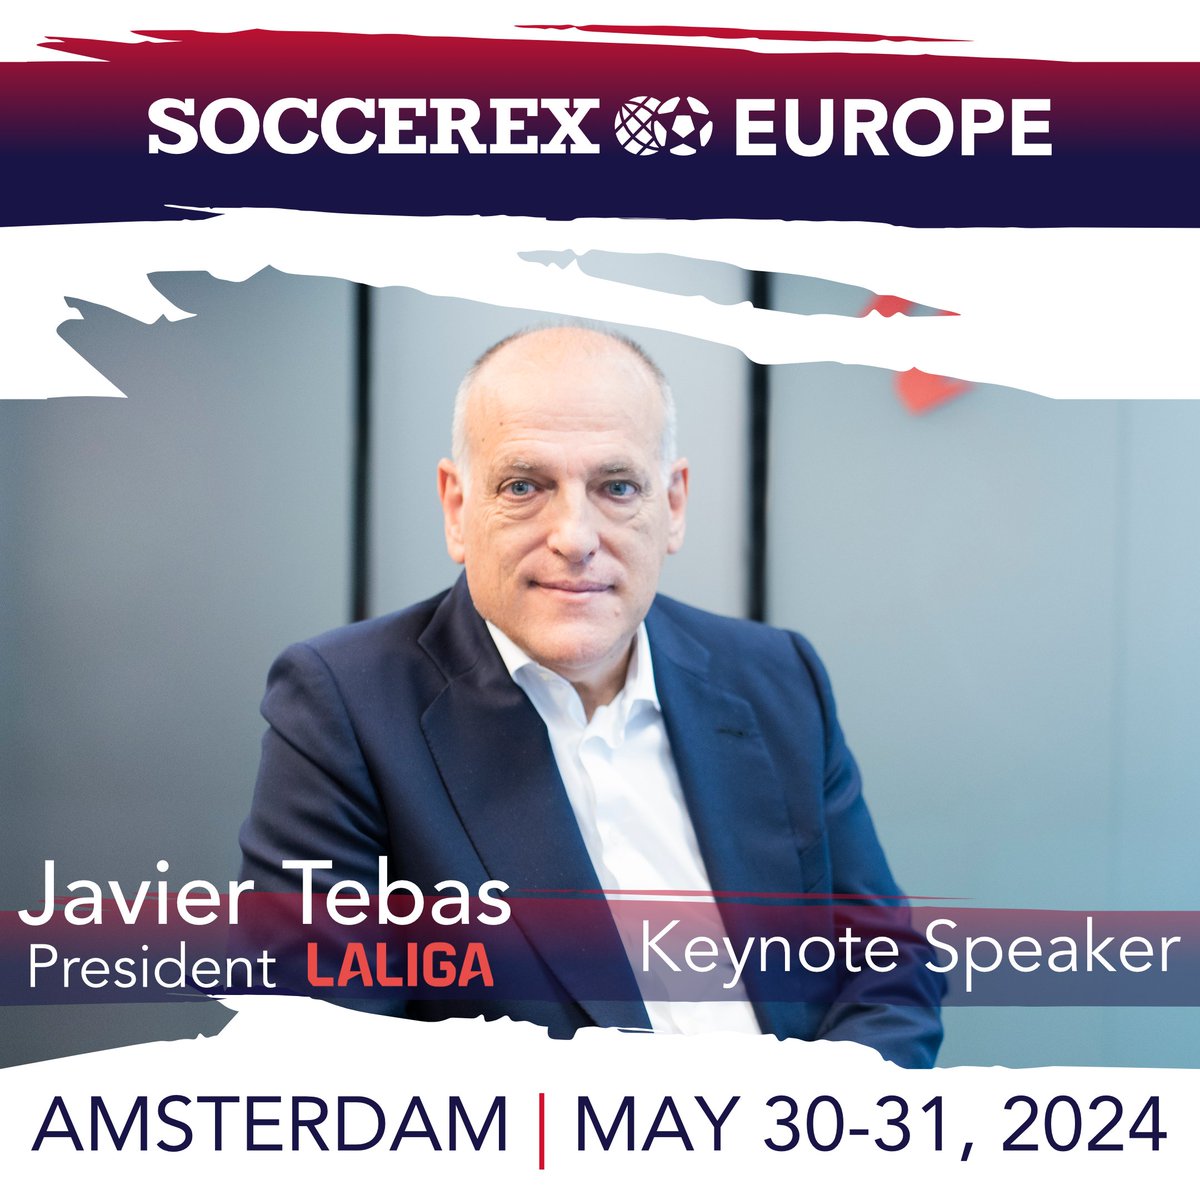 The President of @LaLiga is joining us at #soccerexeurope as a keynote speaker ⚽️ Join @Tebasjavier at the Johan Cruijff ArenA, this May 30th - 31st! soccerex.com/europe-2024/#b…